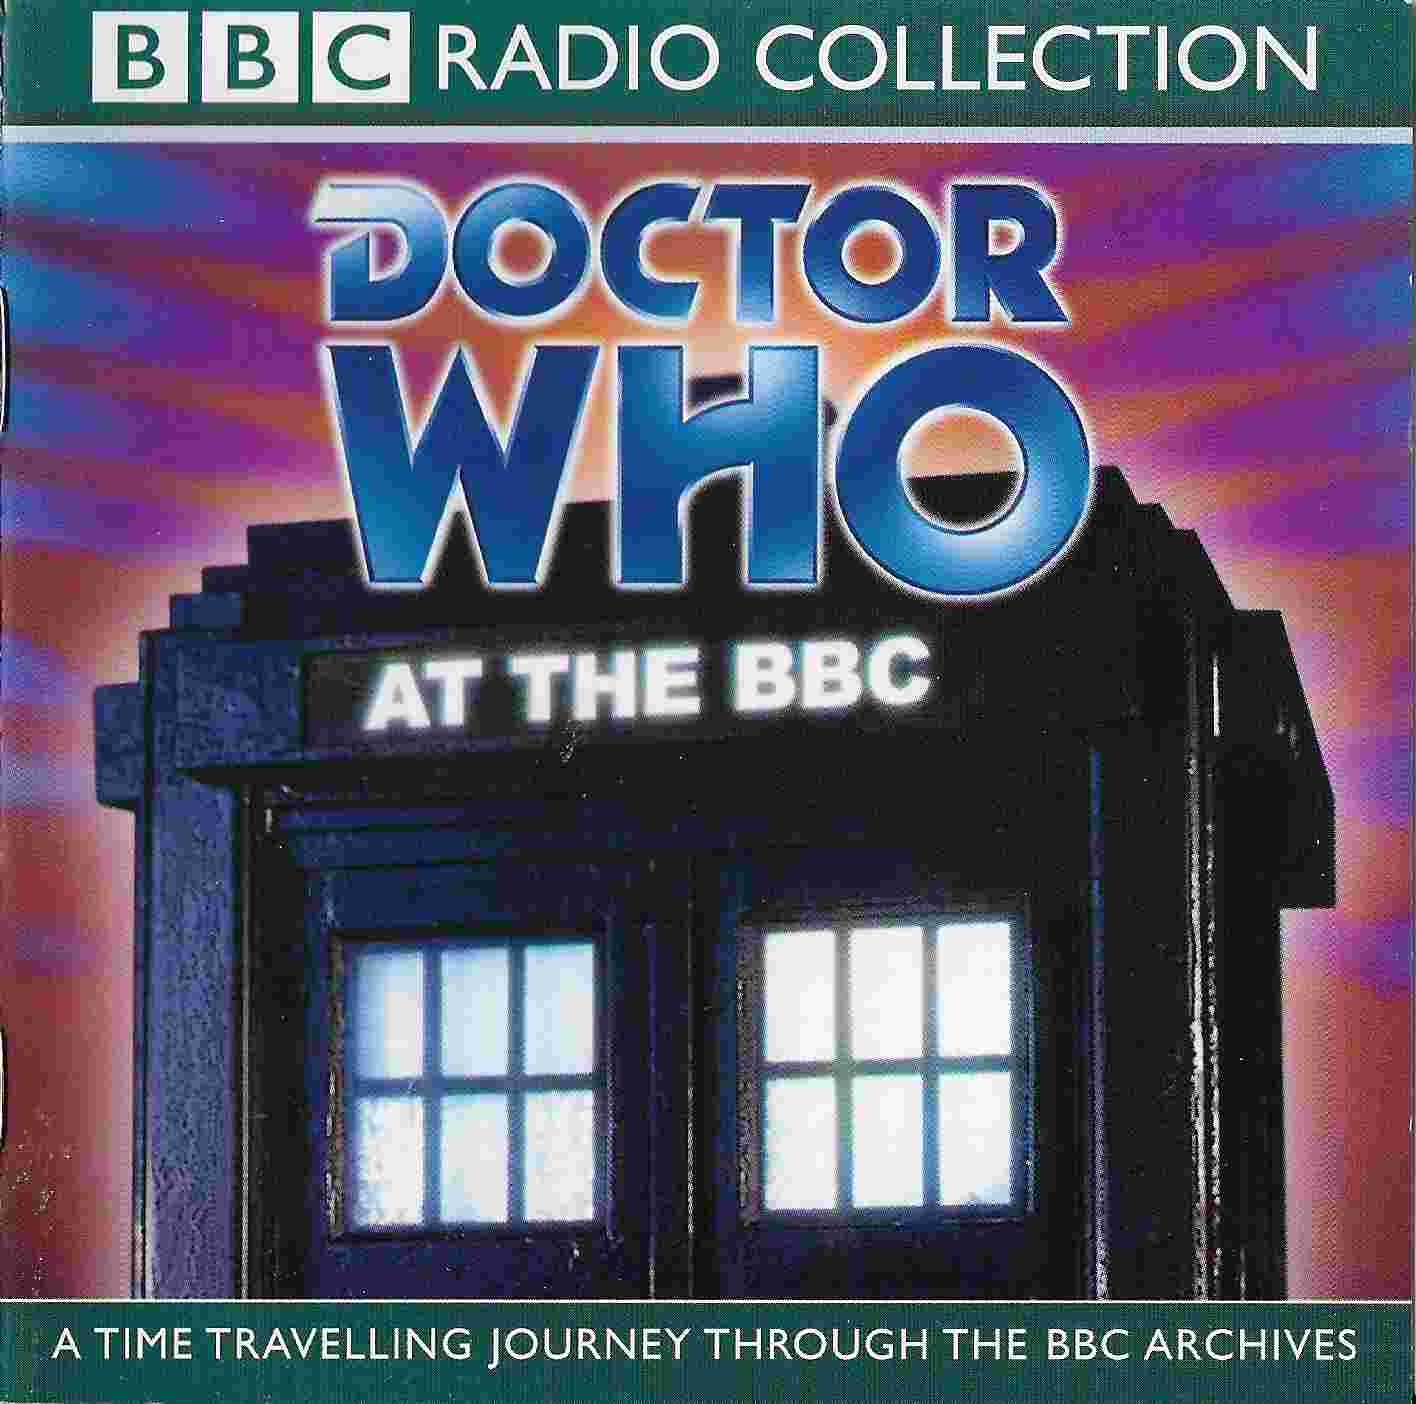 Picture of ISBN 0-563-53087-1 Doctor Who at the BBC - A time travelling journey through the BBC archives by artist Elisabeth Sladen / Nicholas Courtney from the BBC cds - Records and Tapes library